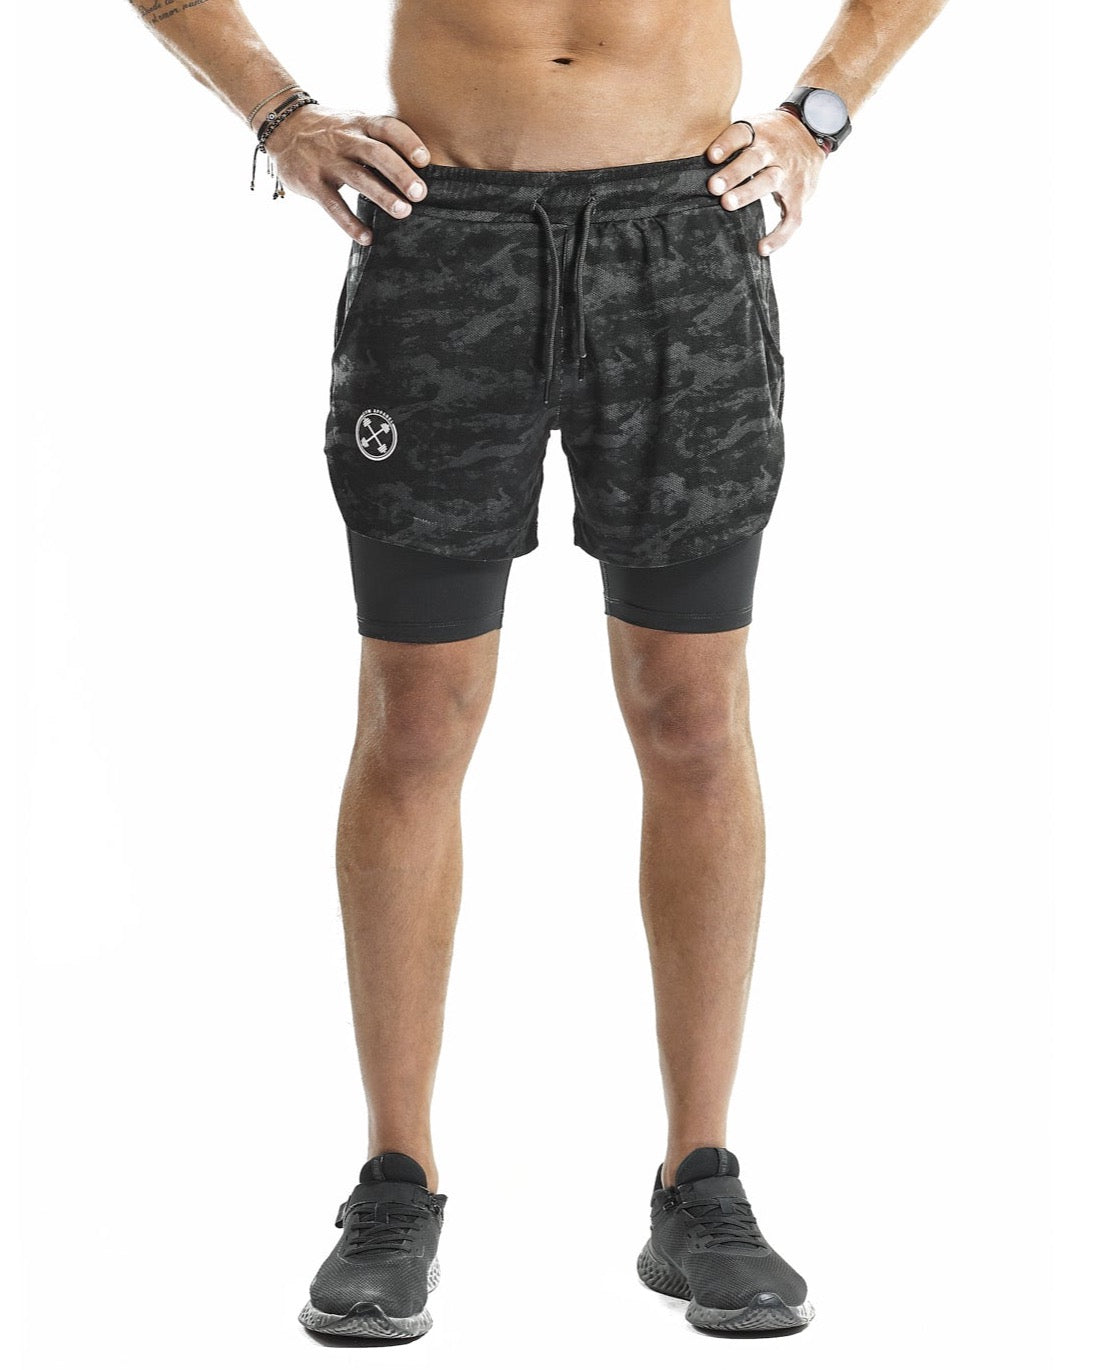 2 in 1 Functional Training Shorts [Smoke Camo/Black] Limited Edition - Shorts - Gym Apparel Egypt